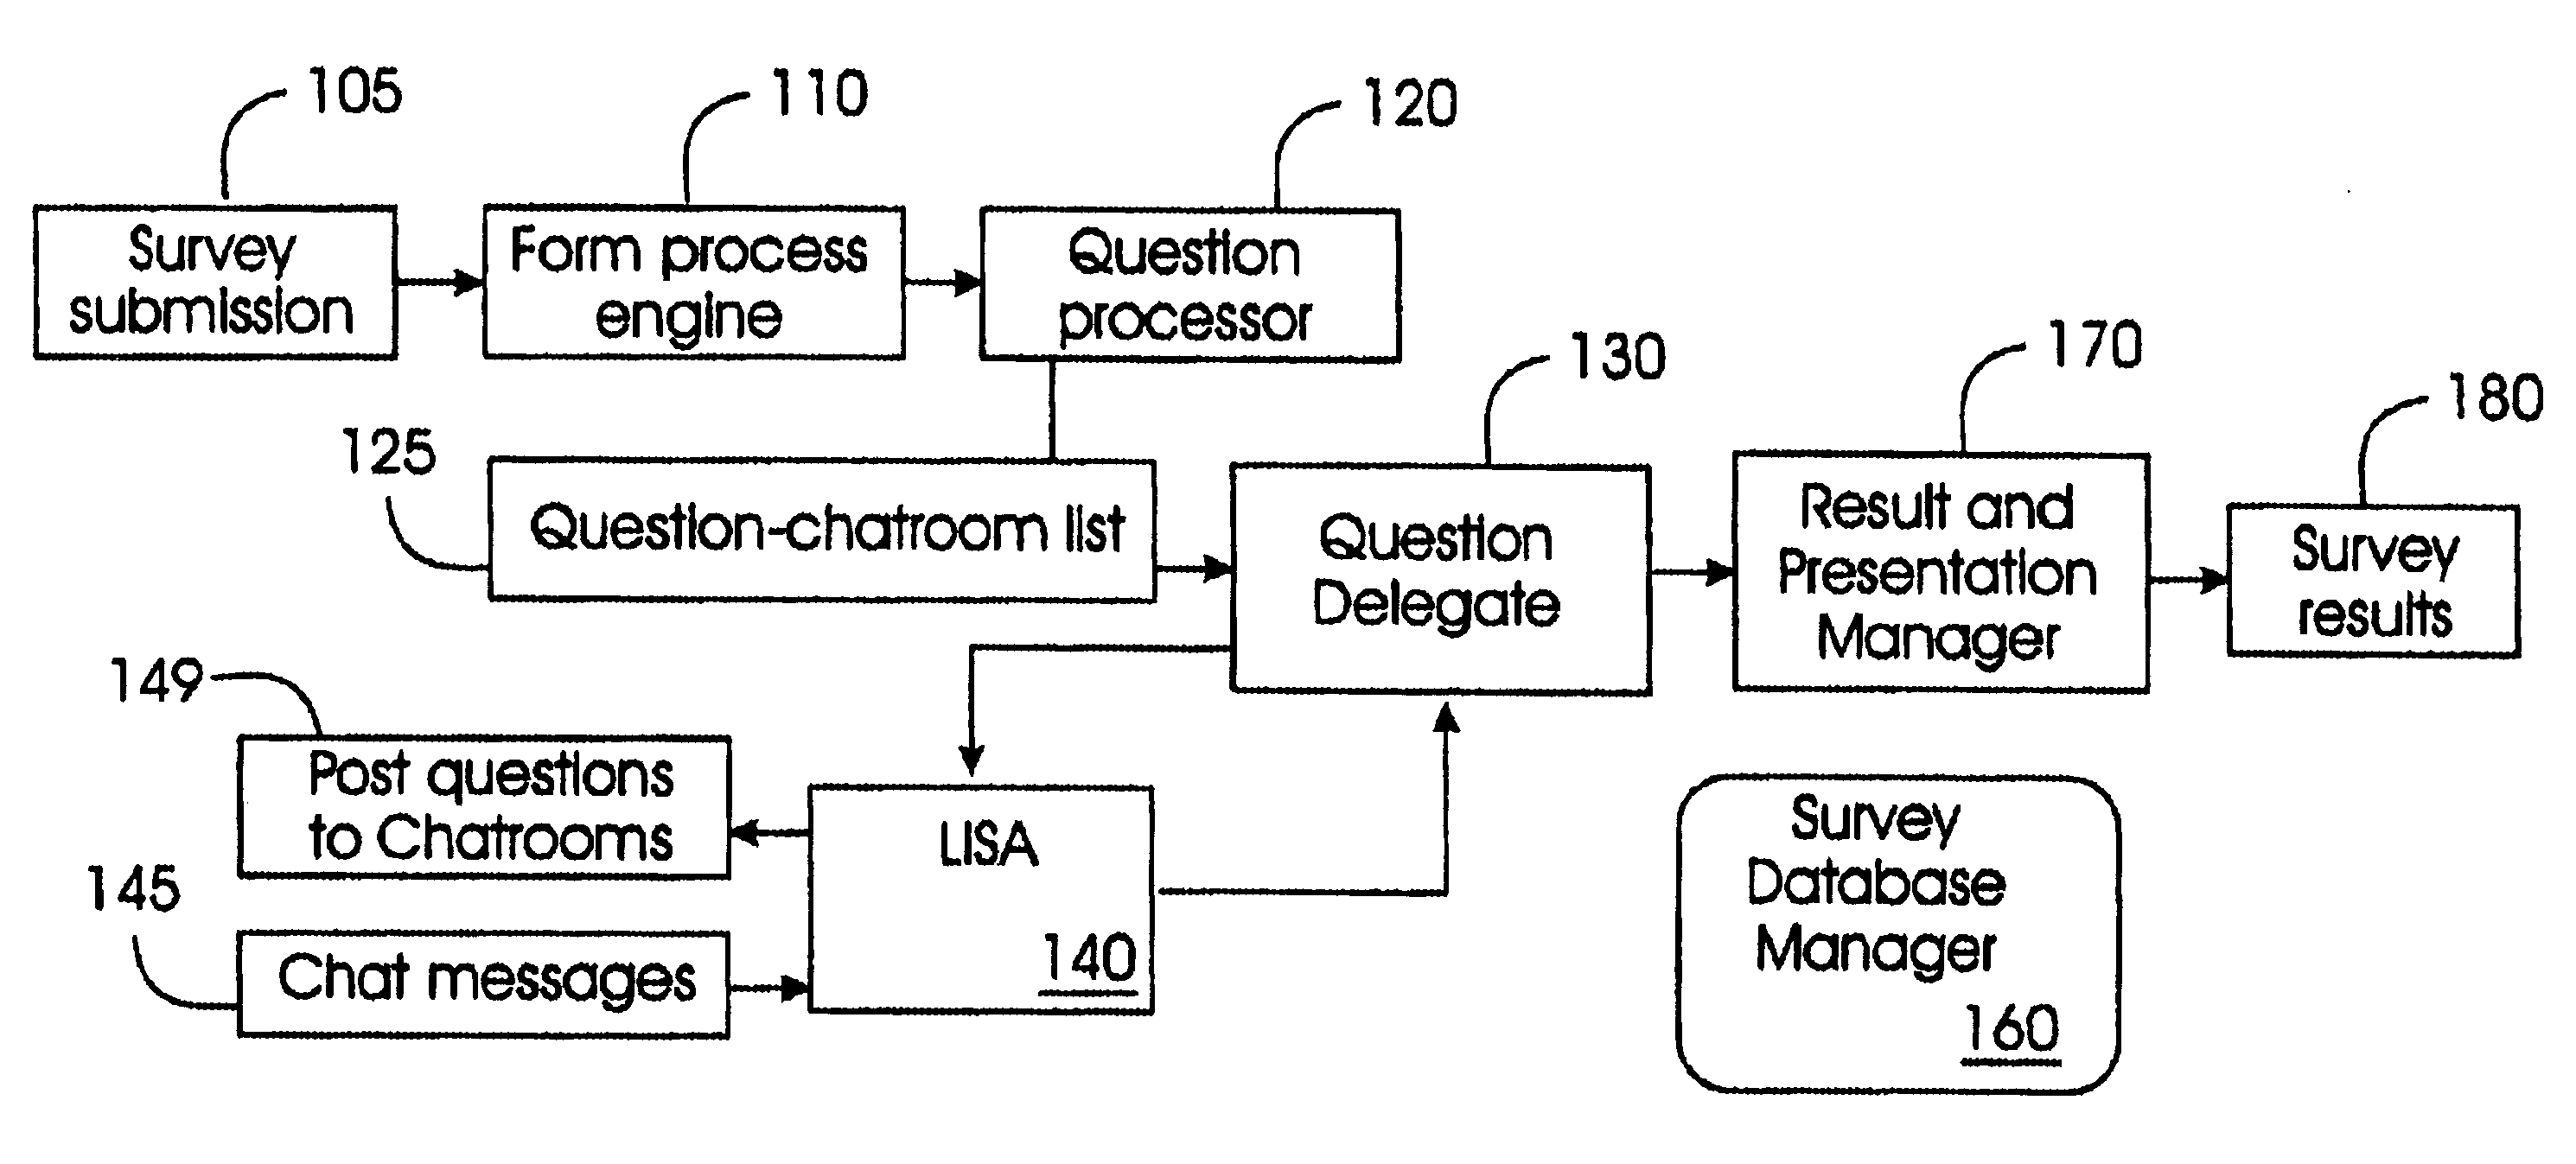 System and method for automatically conducting and managing surveys based on real-time information analysis